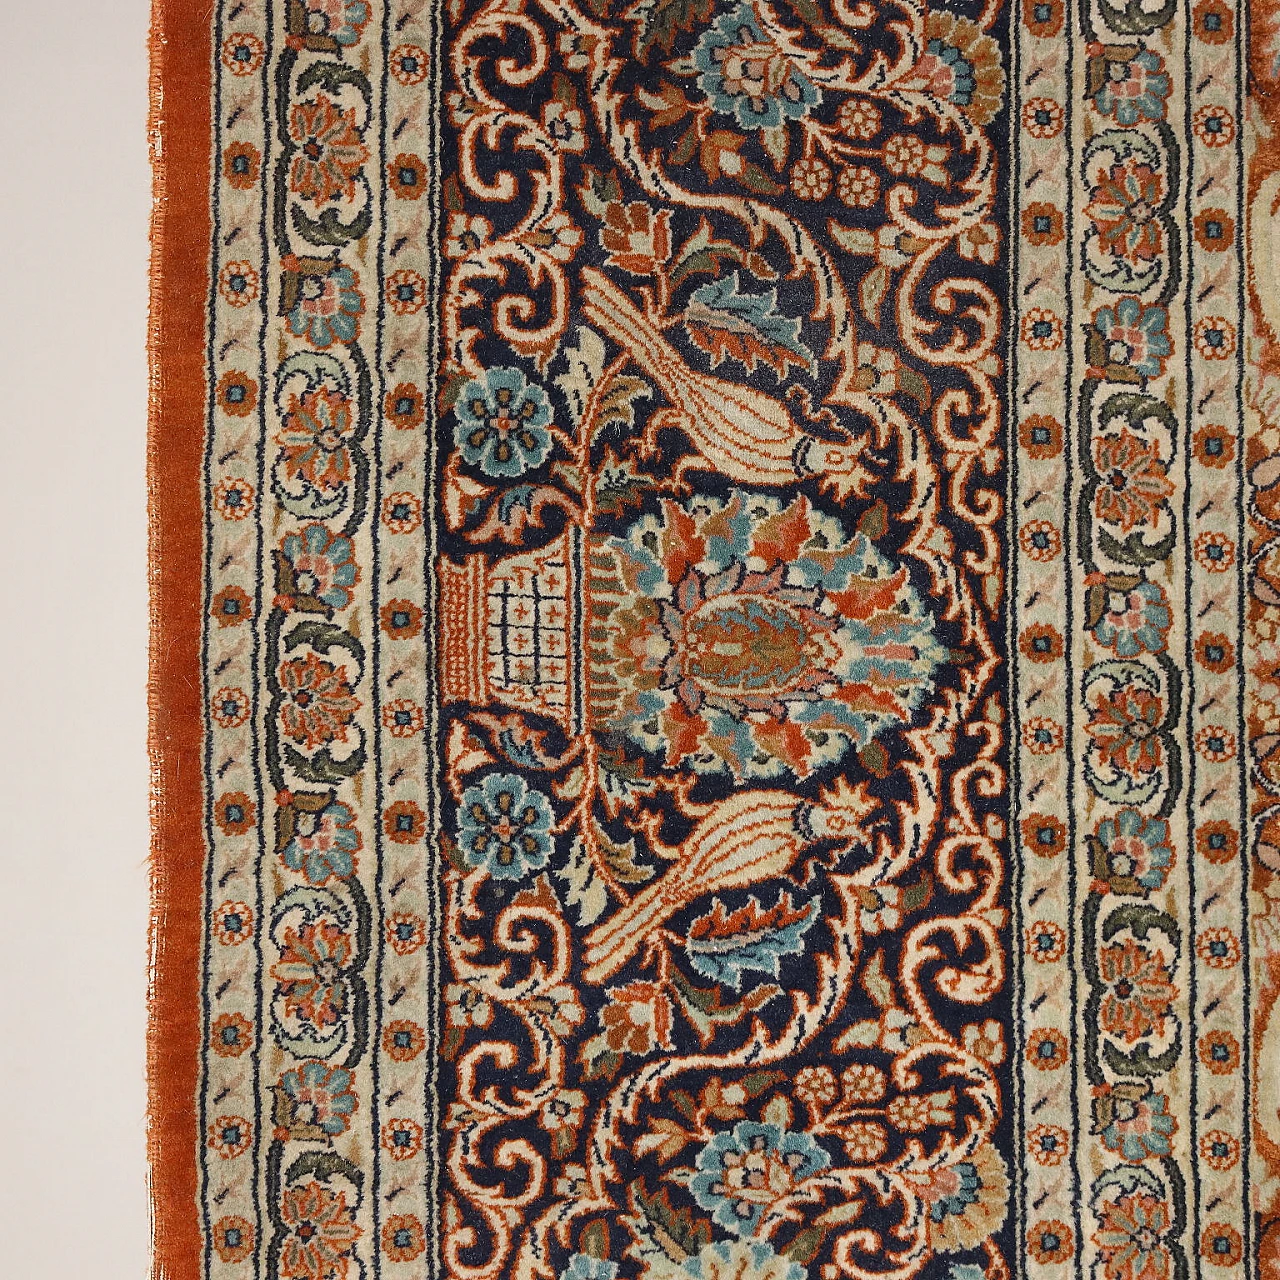 Lahore cotton, wool and silk fine-knotted rug 6